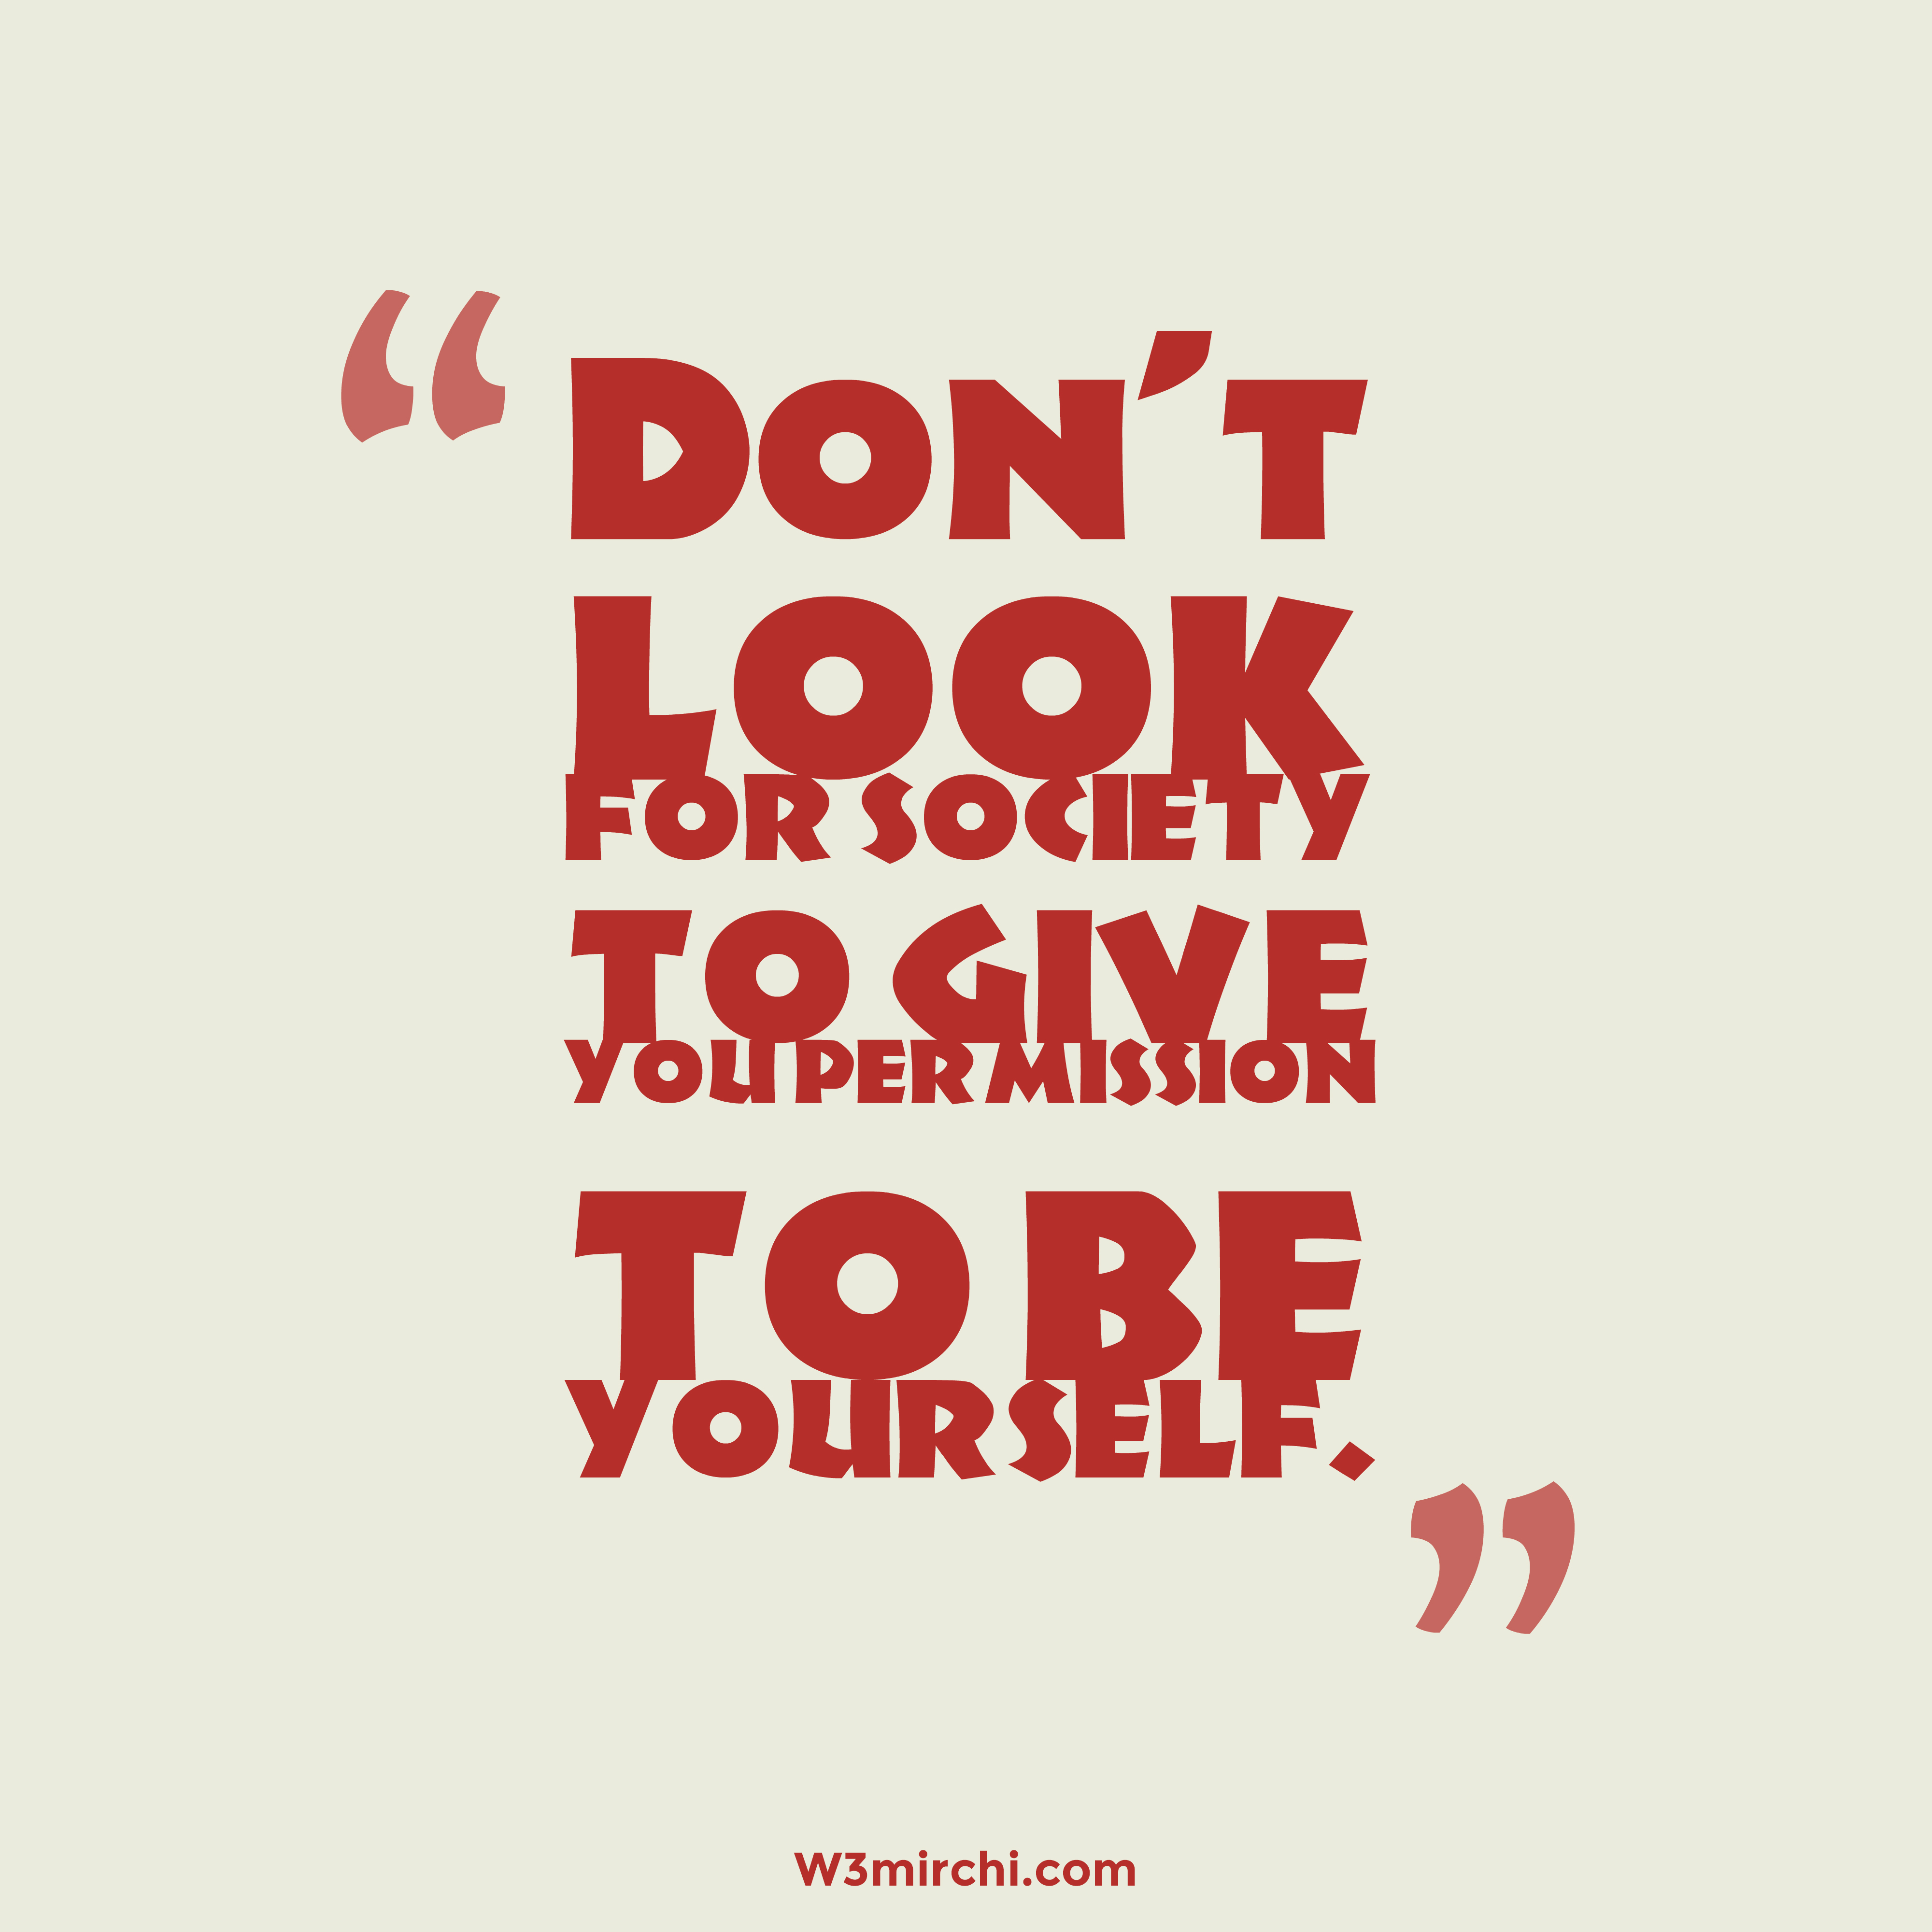 Don’t look for society to give you